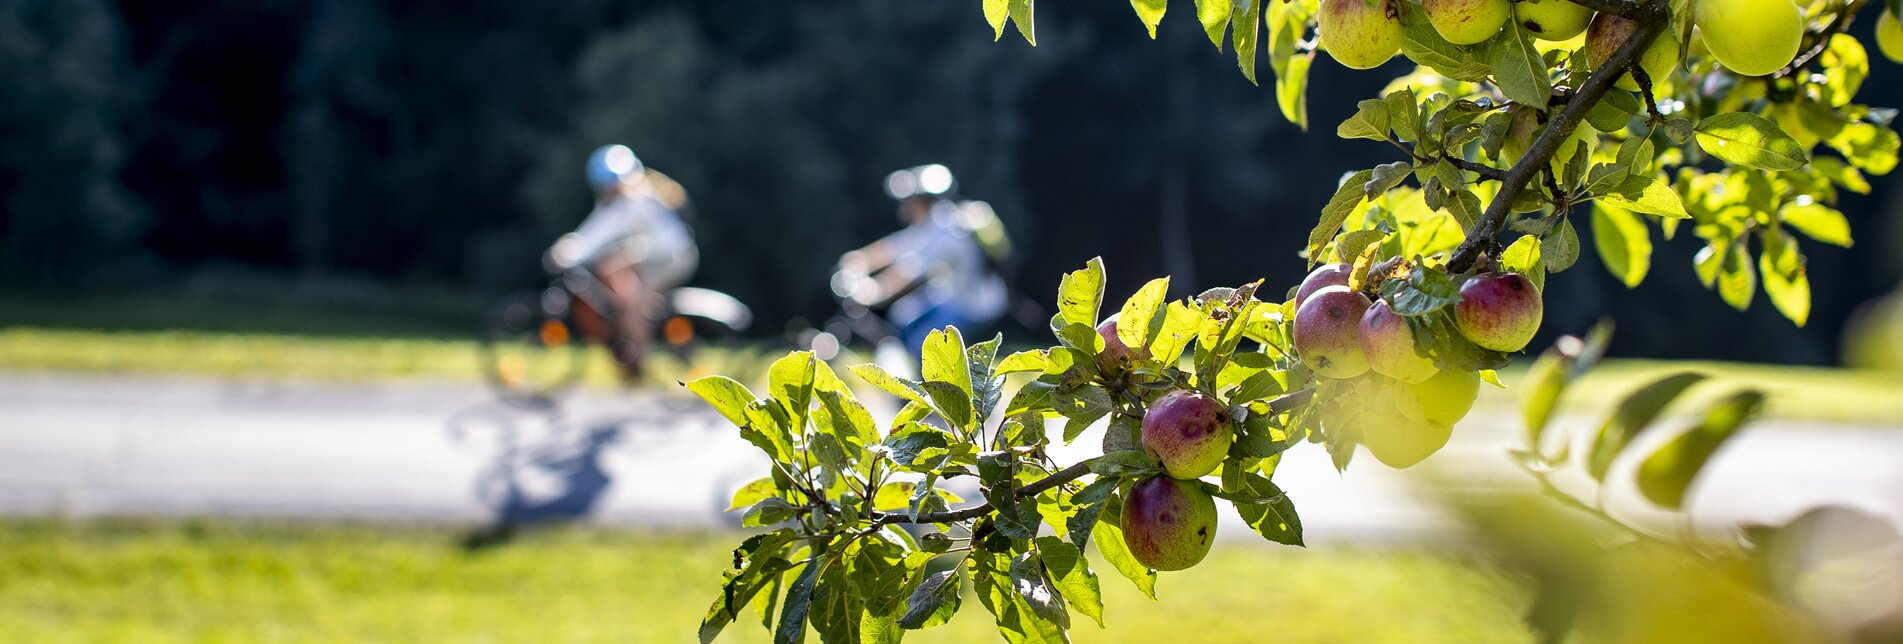 Cycling along orchards | © Steiermark Tourismus | Tom Lamm